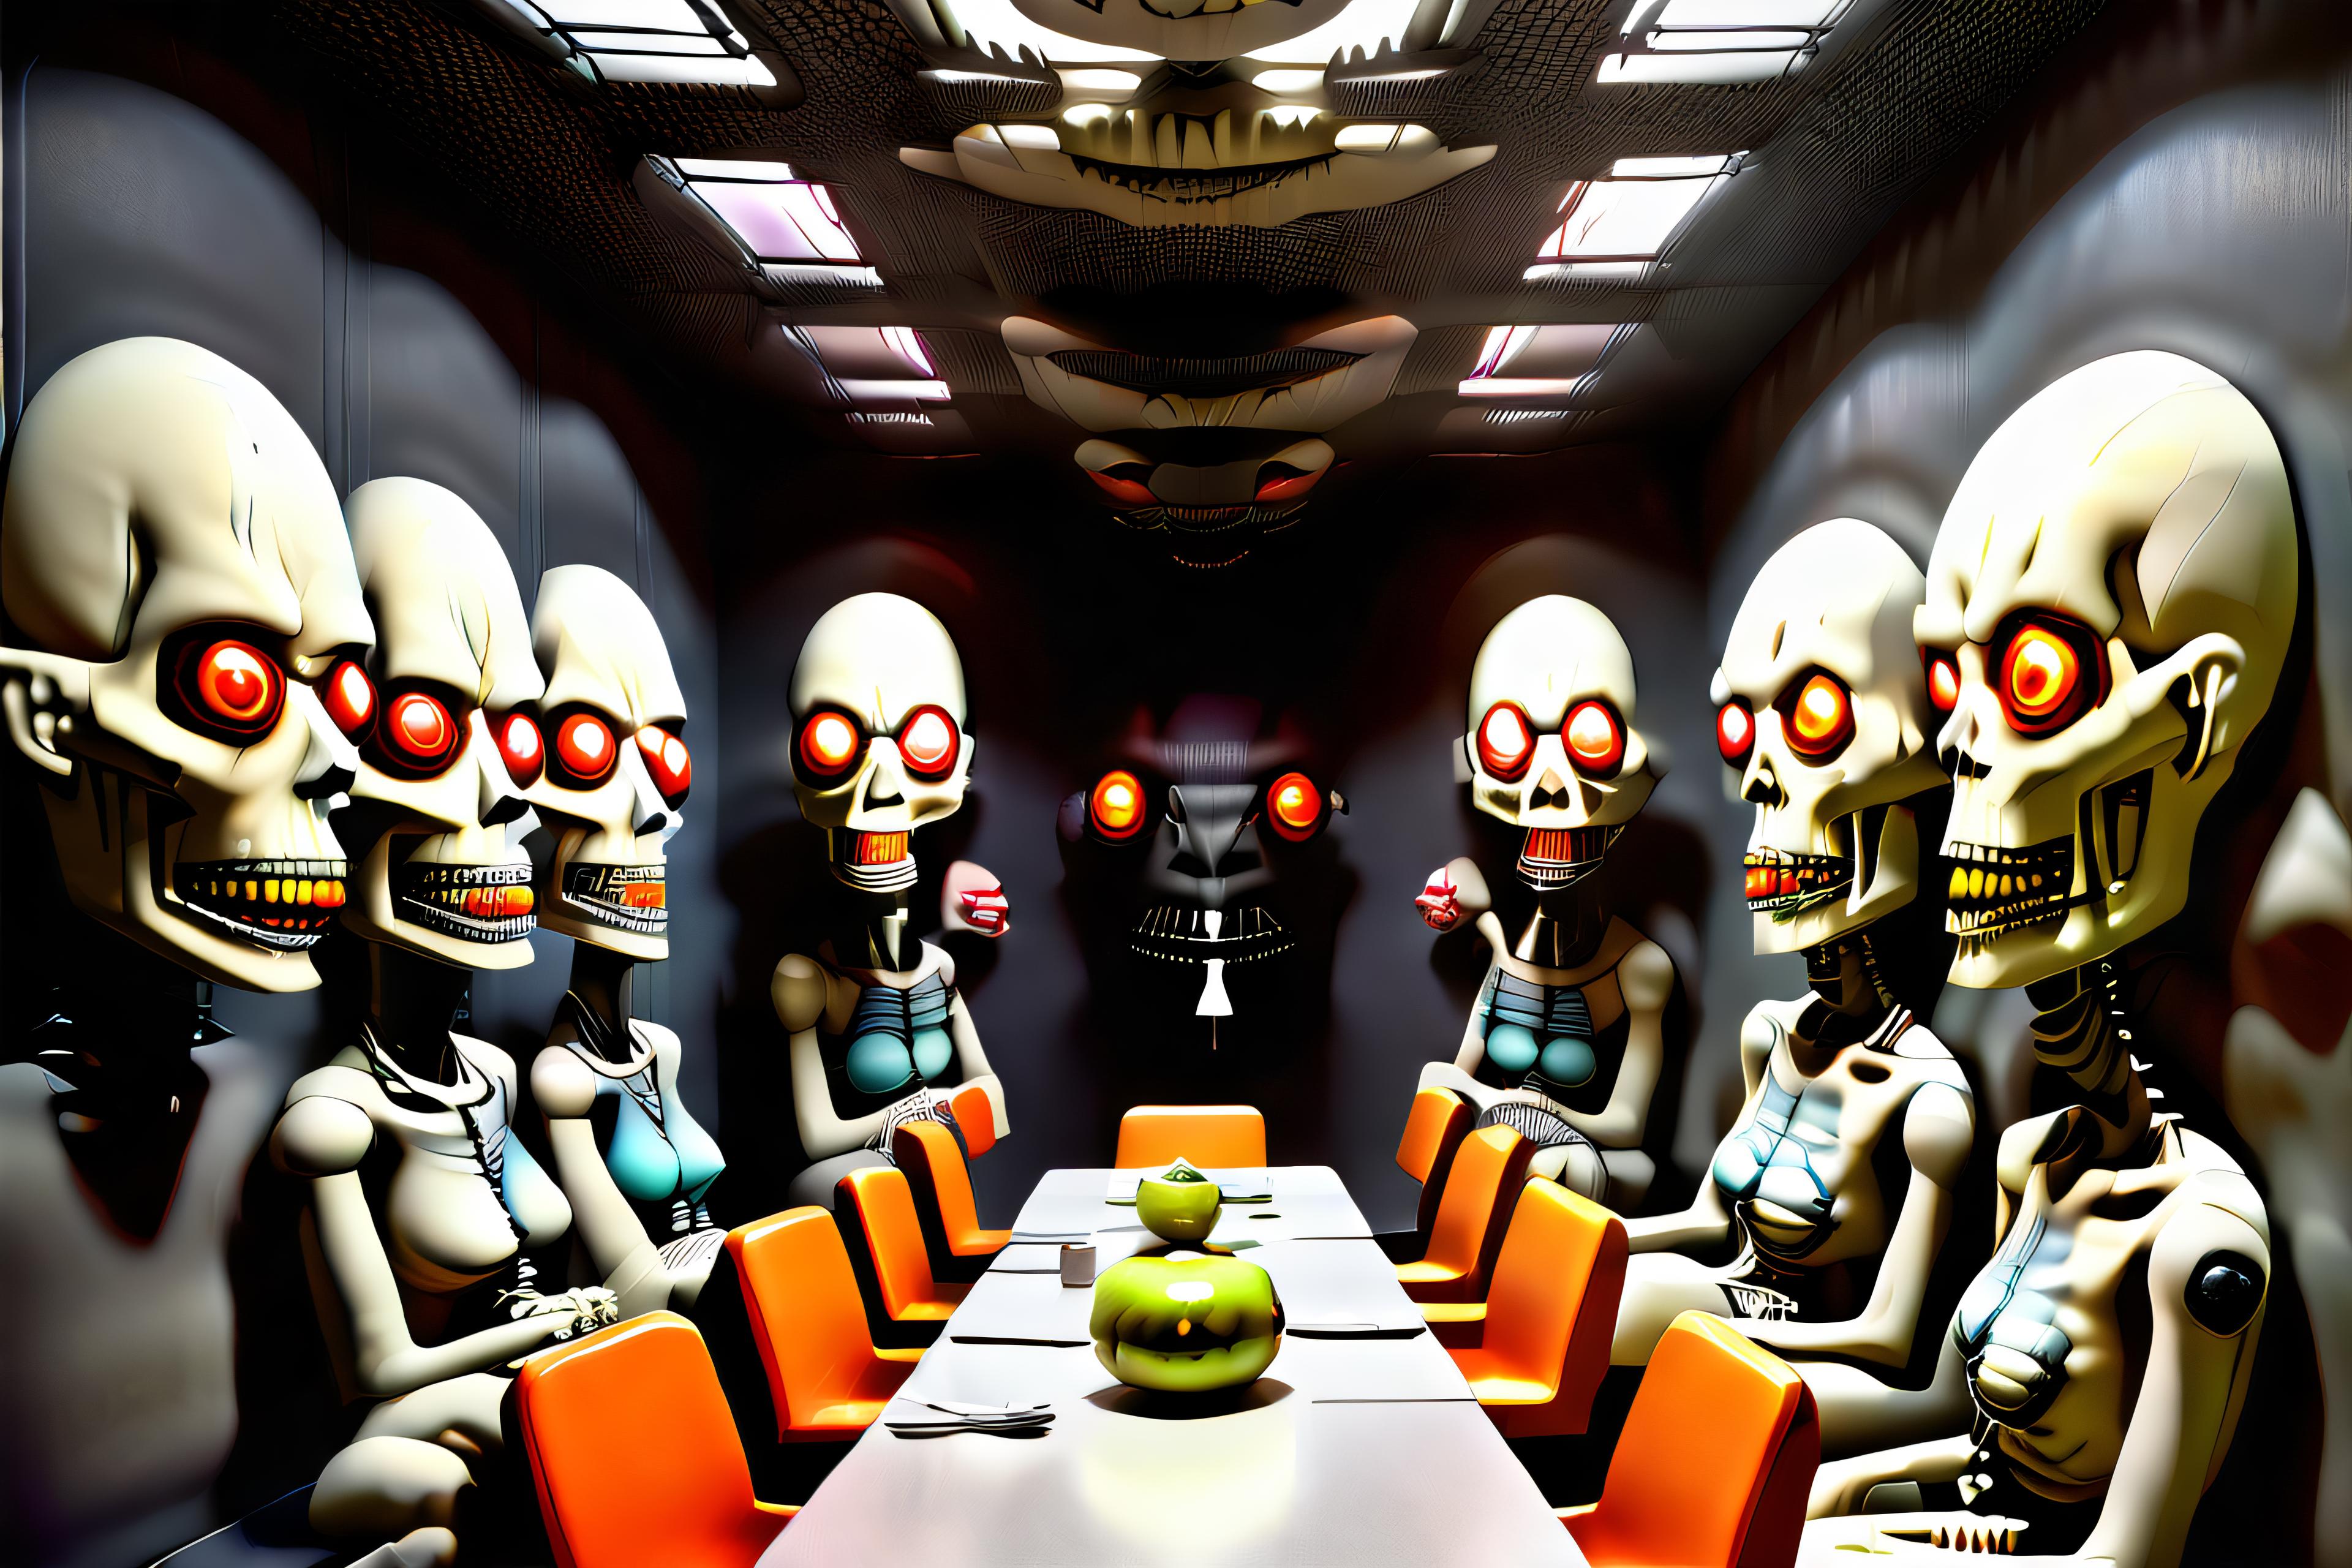 Lunch Meeting image by patricktoba